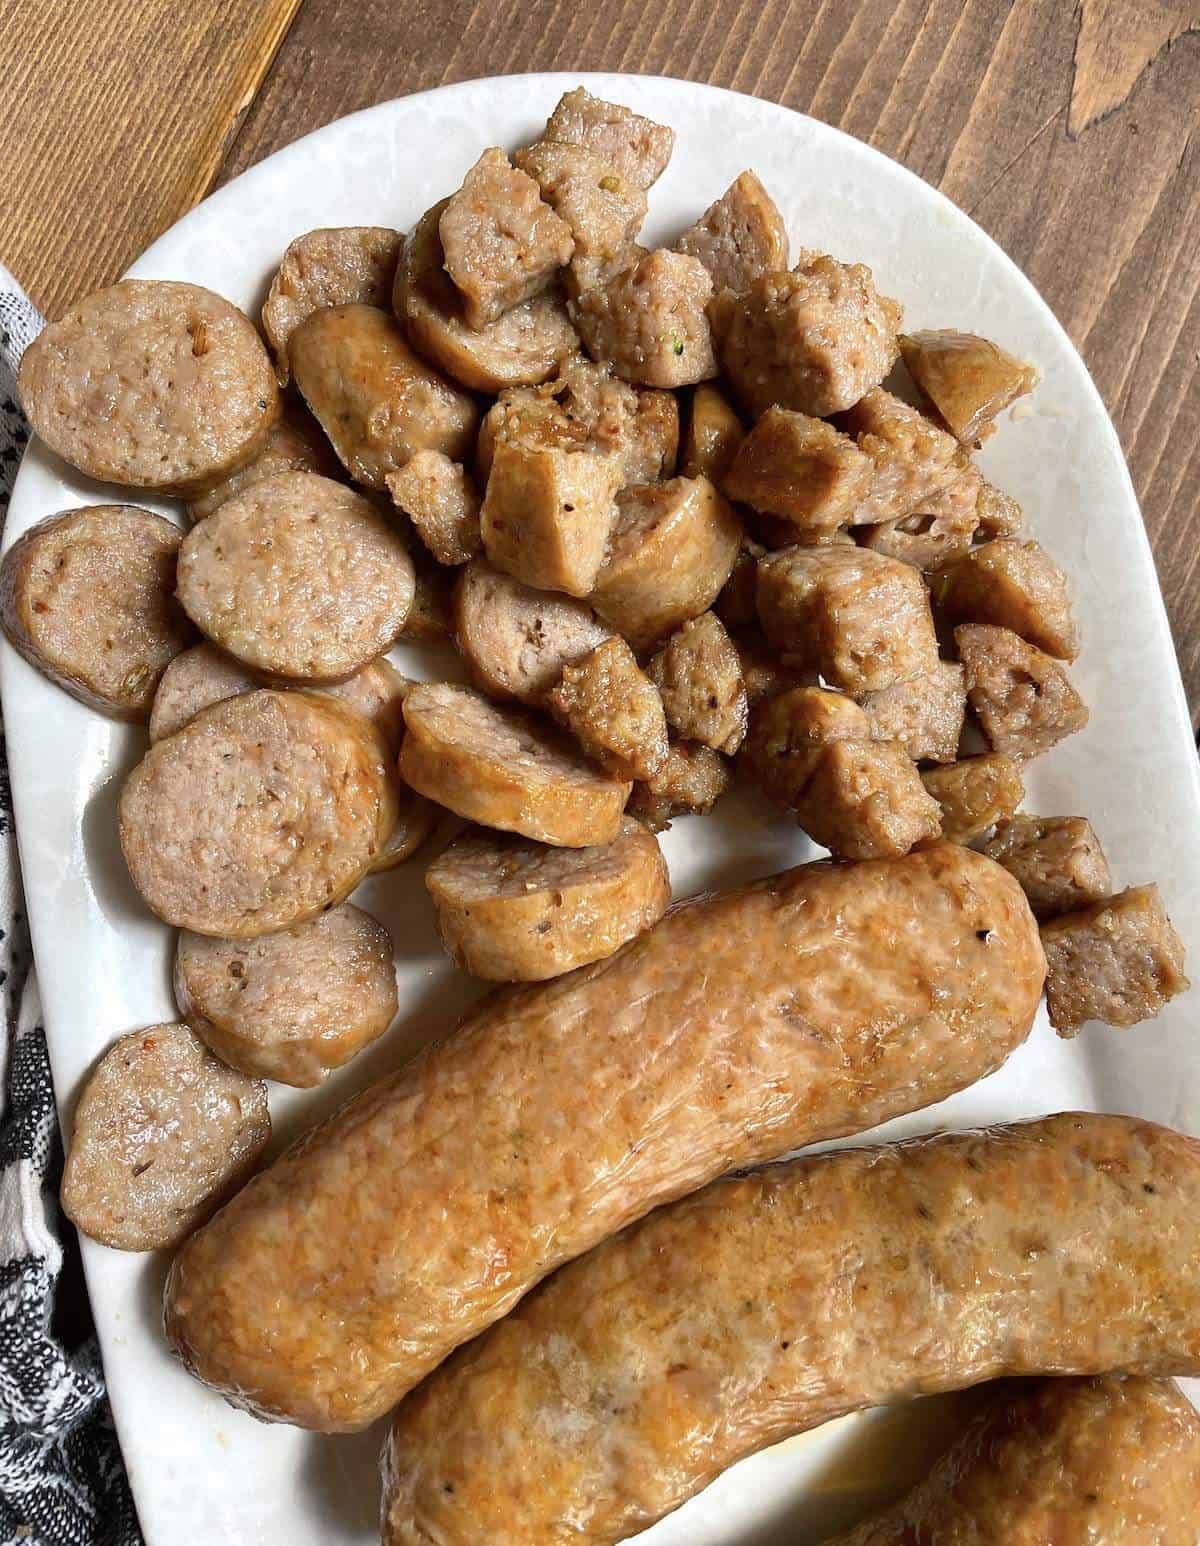 Air fried Italian sausage cut different ways on a white plate.